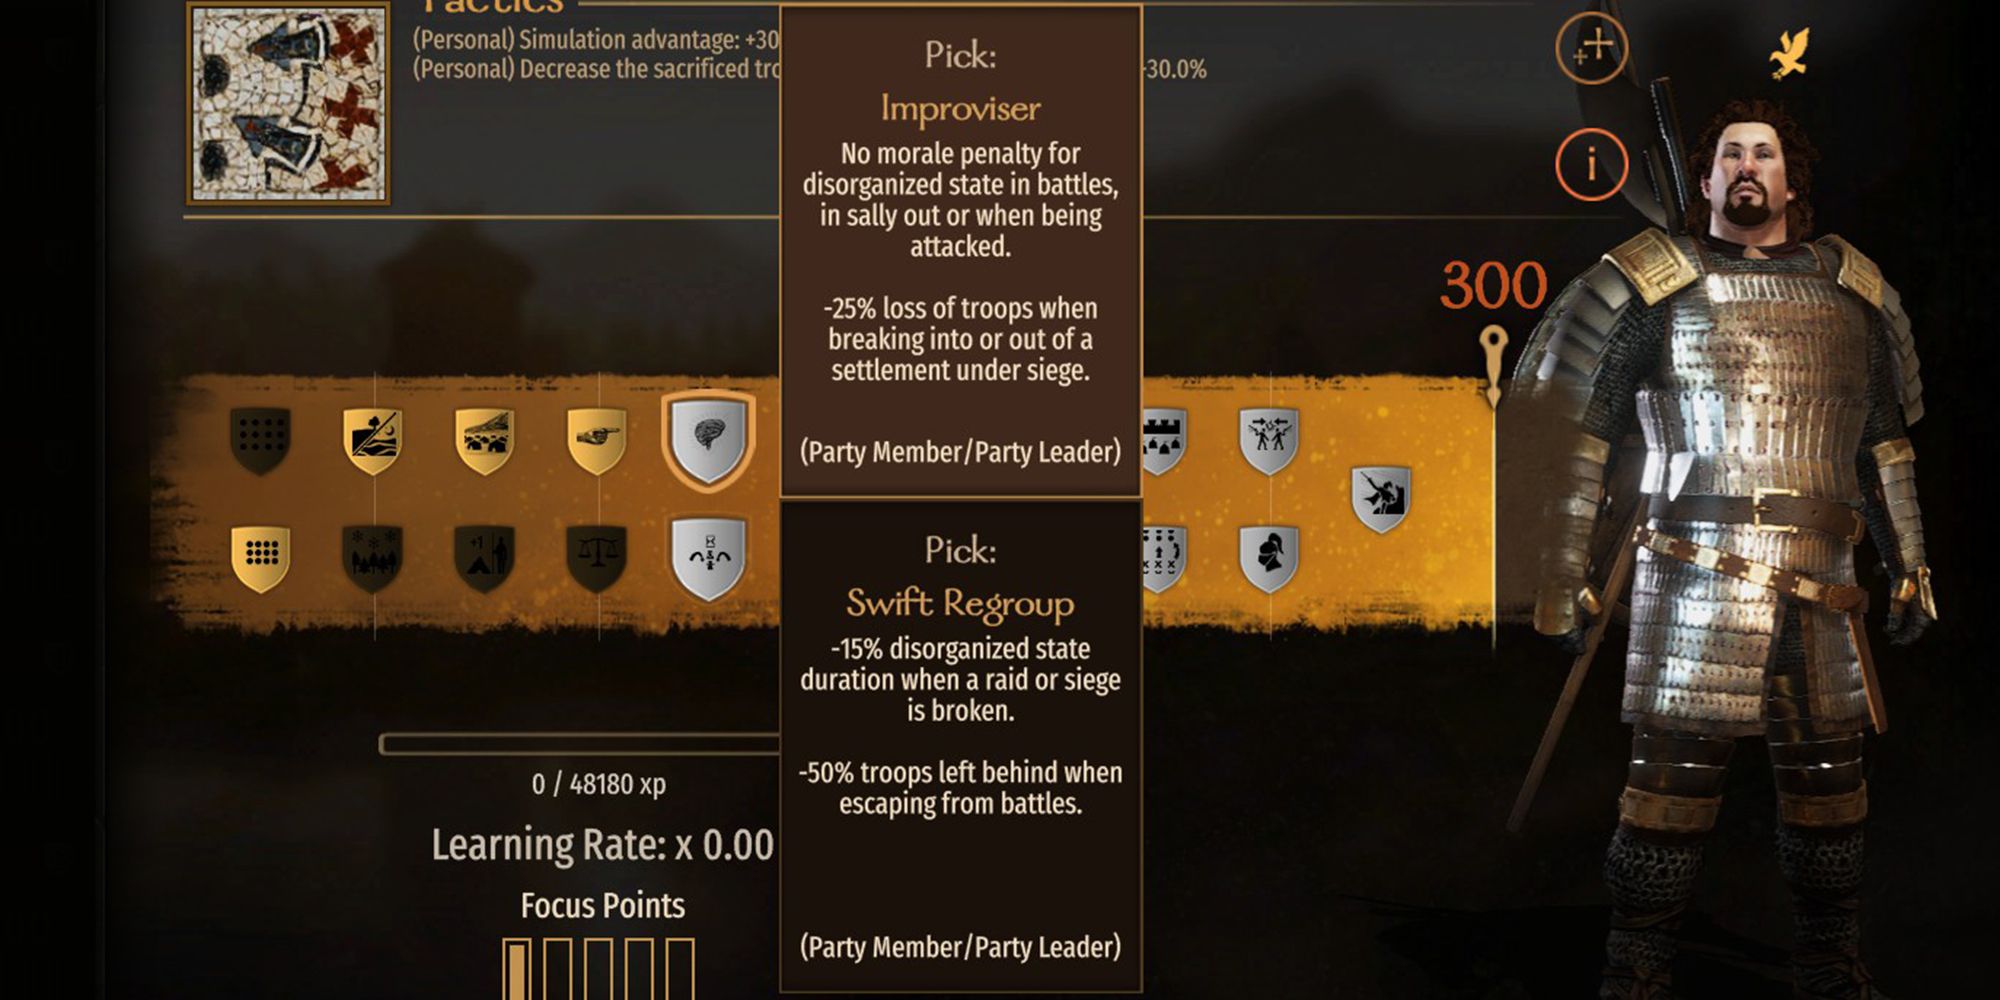 Tactics Improviser Perk Menu Description There is no morale penalty for confusion while in combat, in a spawn, or while being attacked. -25% troop losses when entering or invading settlements under siege.